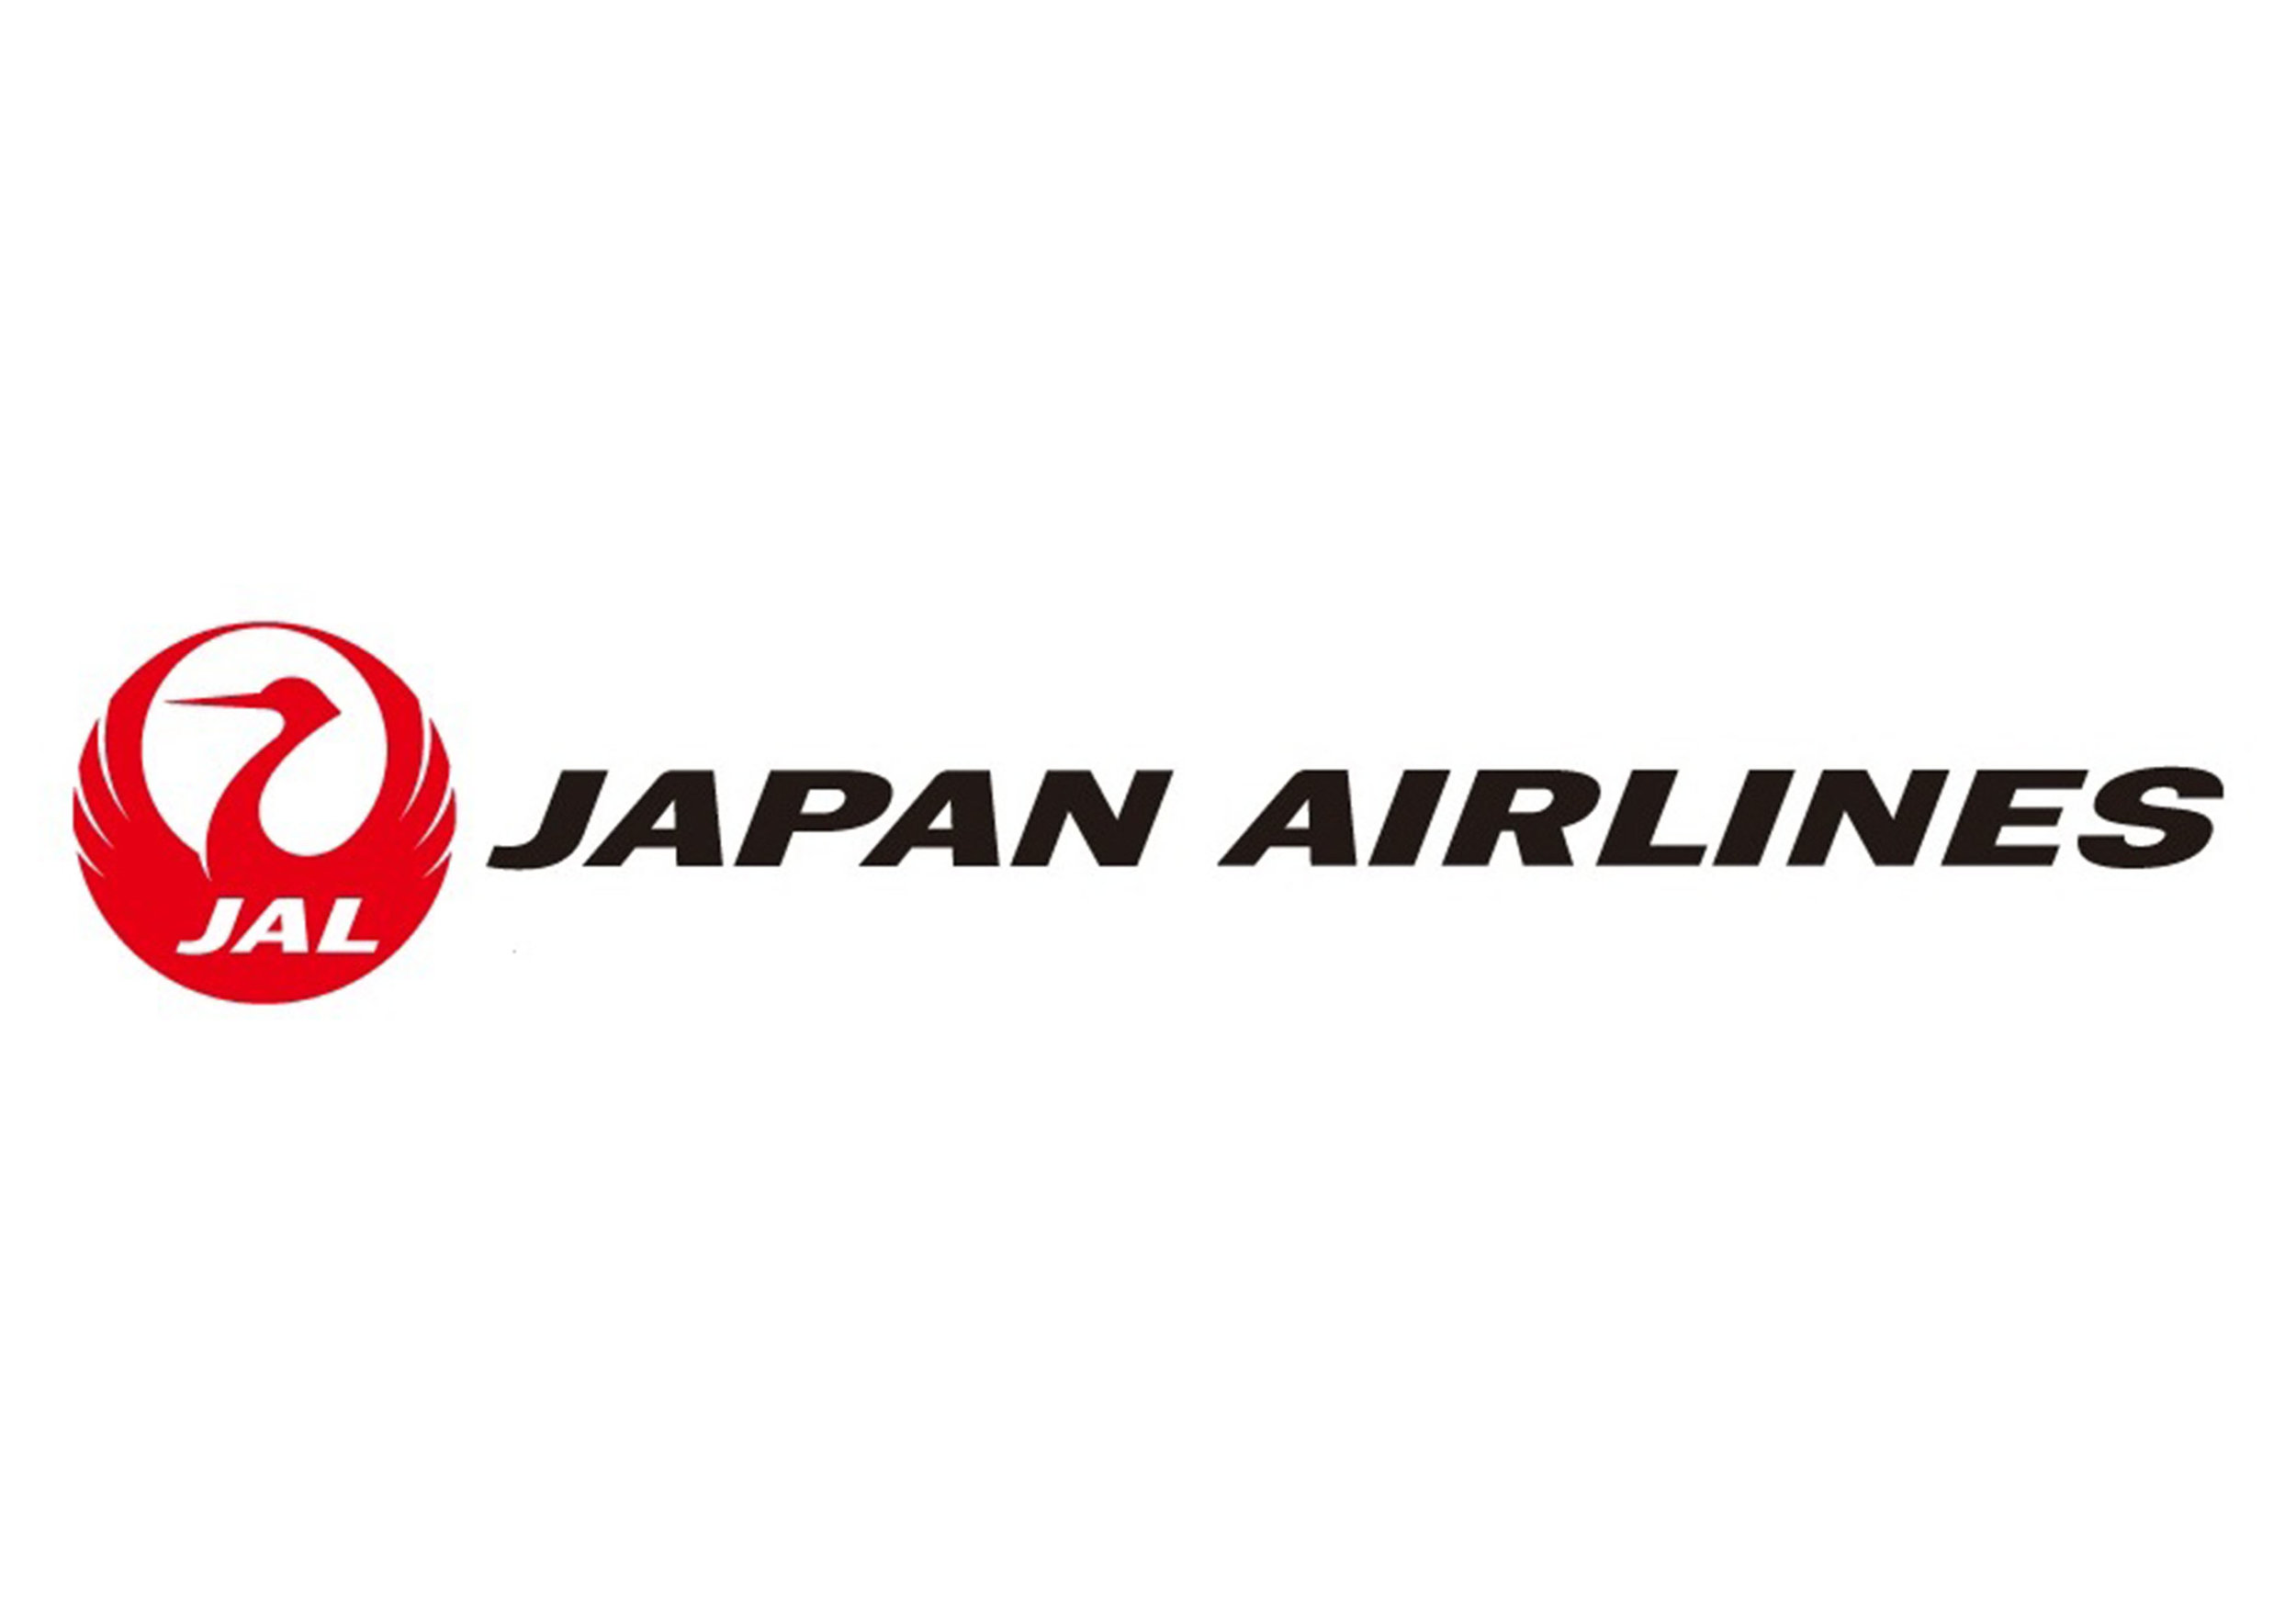  ..  Japan Airlines 